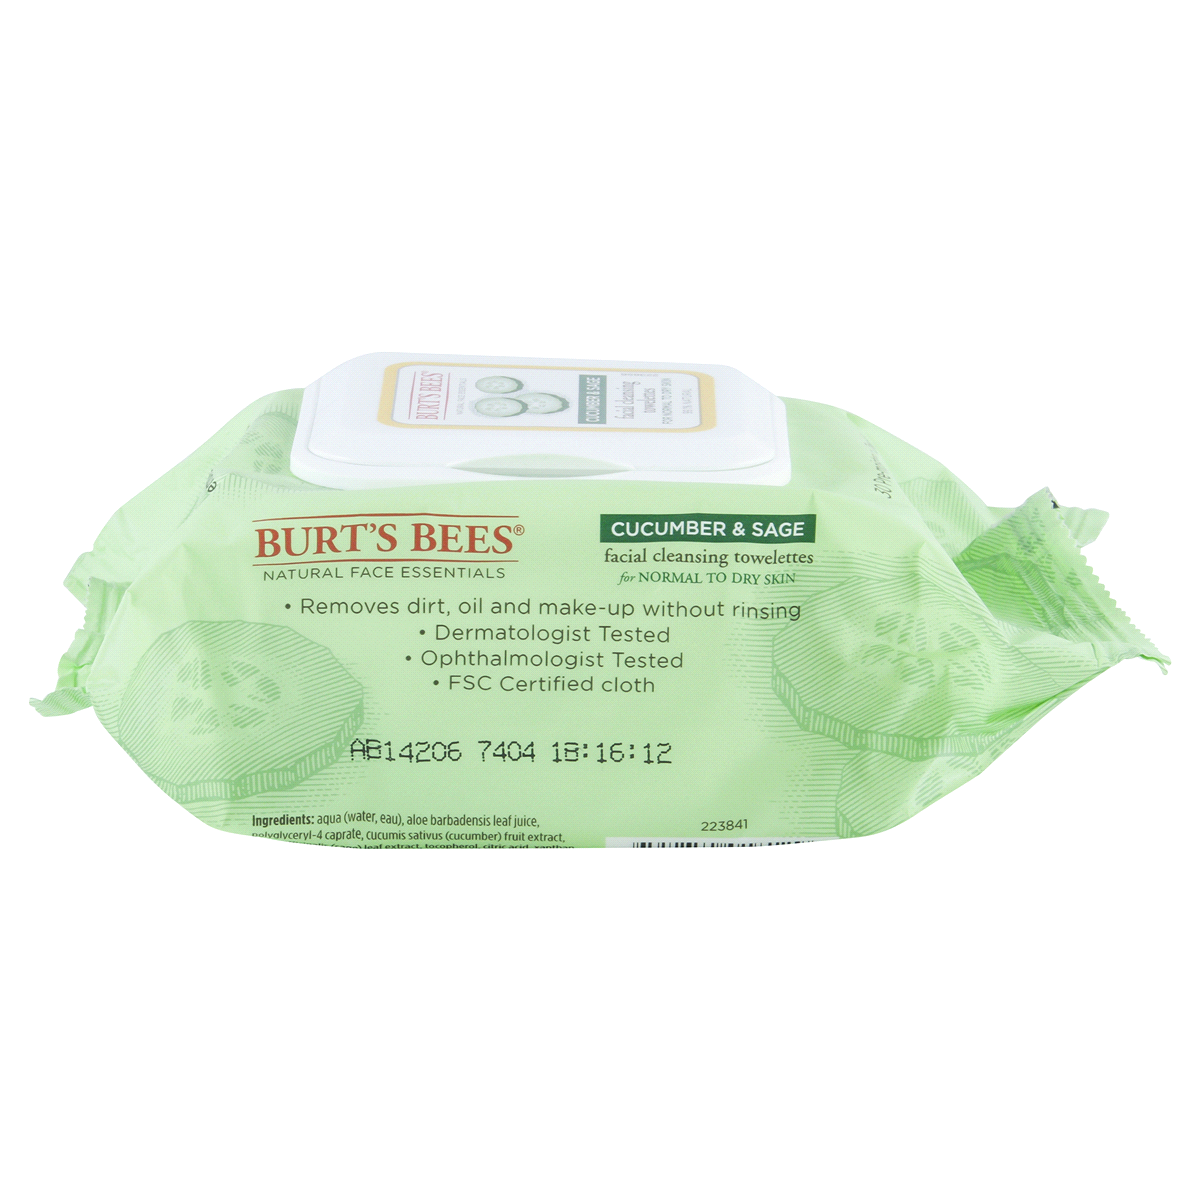 slide 44 of 134, Burt's Bees Normal To Dry Skin Facial Cleansing Towelettes With Cucumber & Sage Extracts, 30 ct